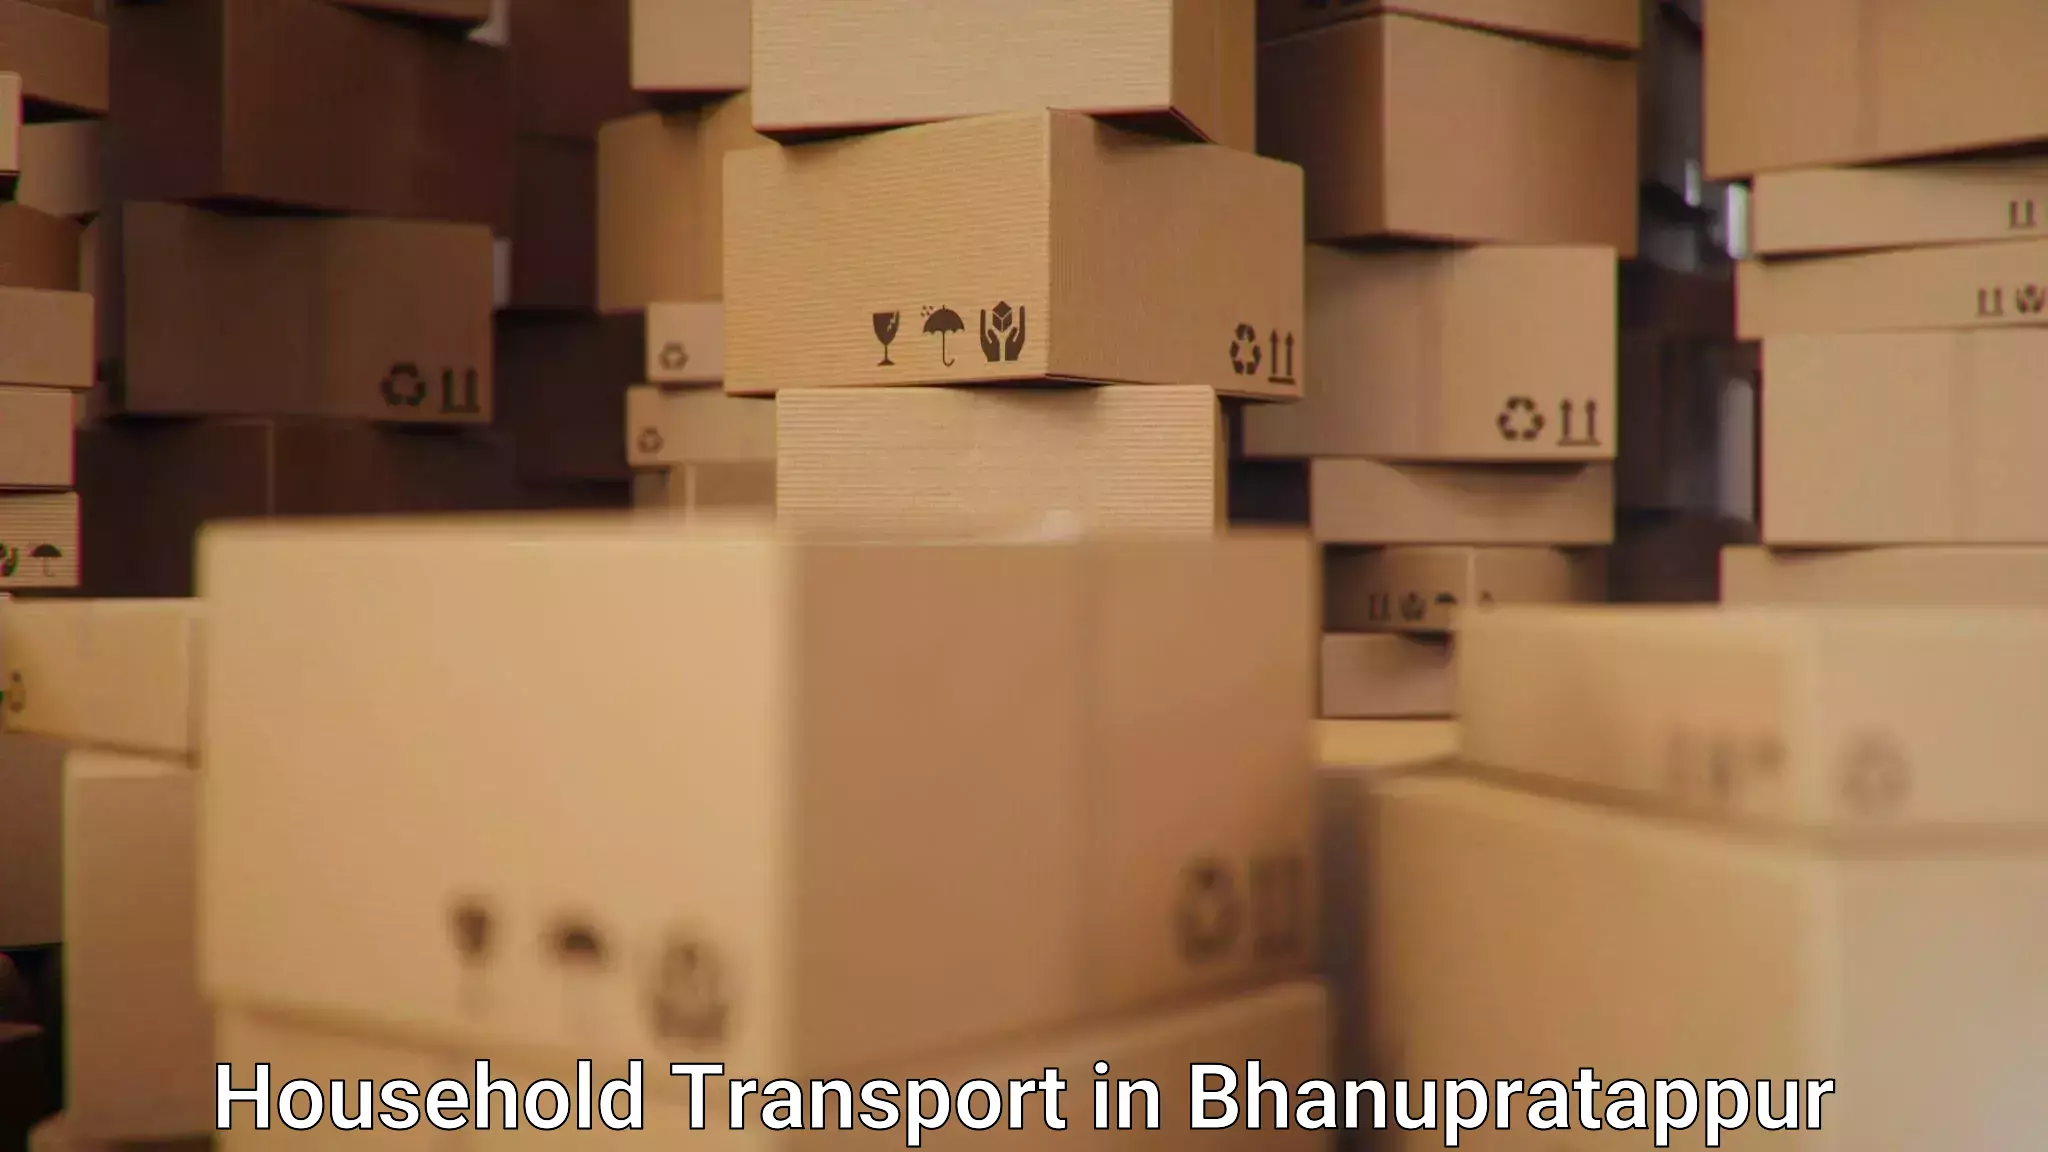 Professional movers and packers in Bhanupratappur